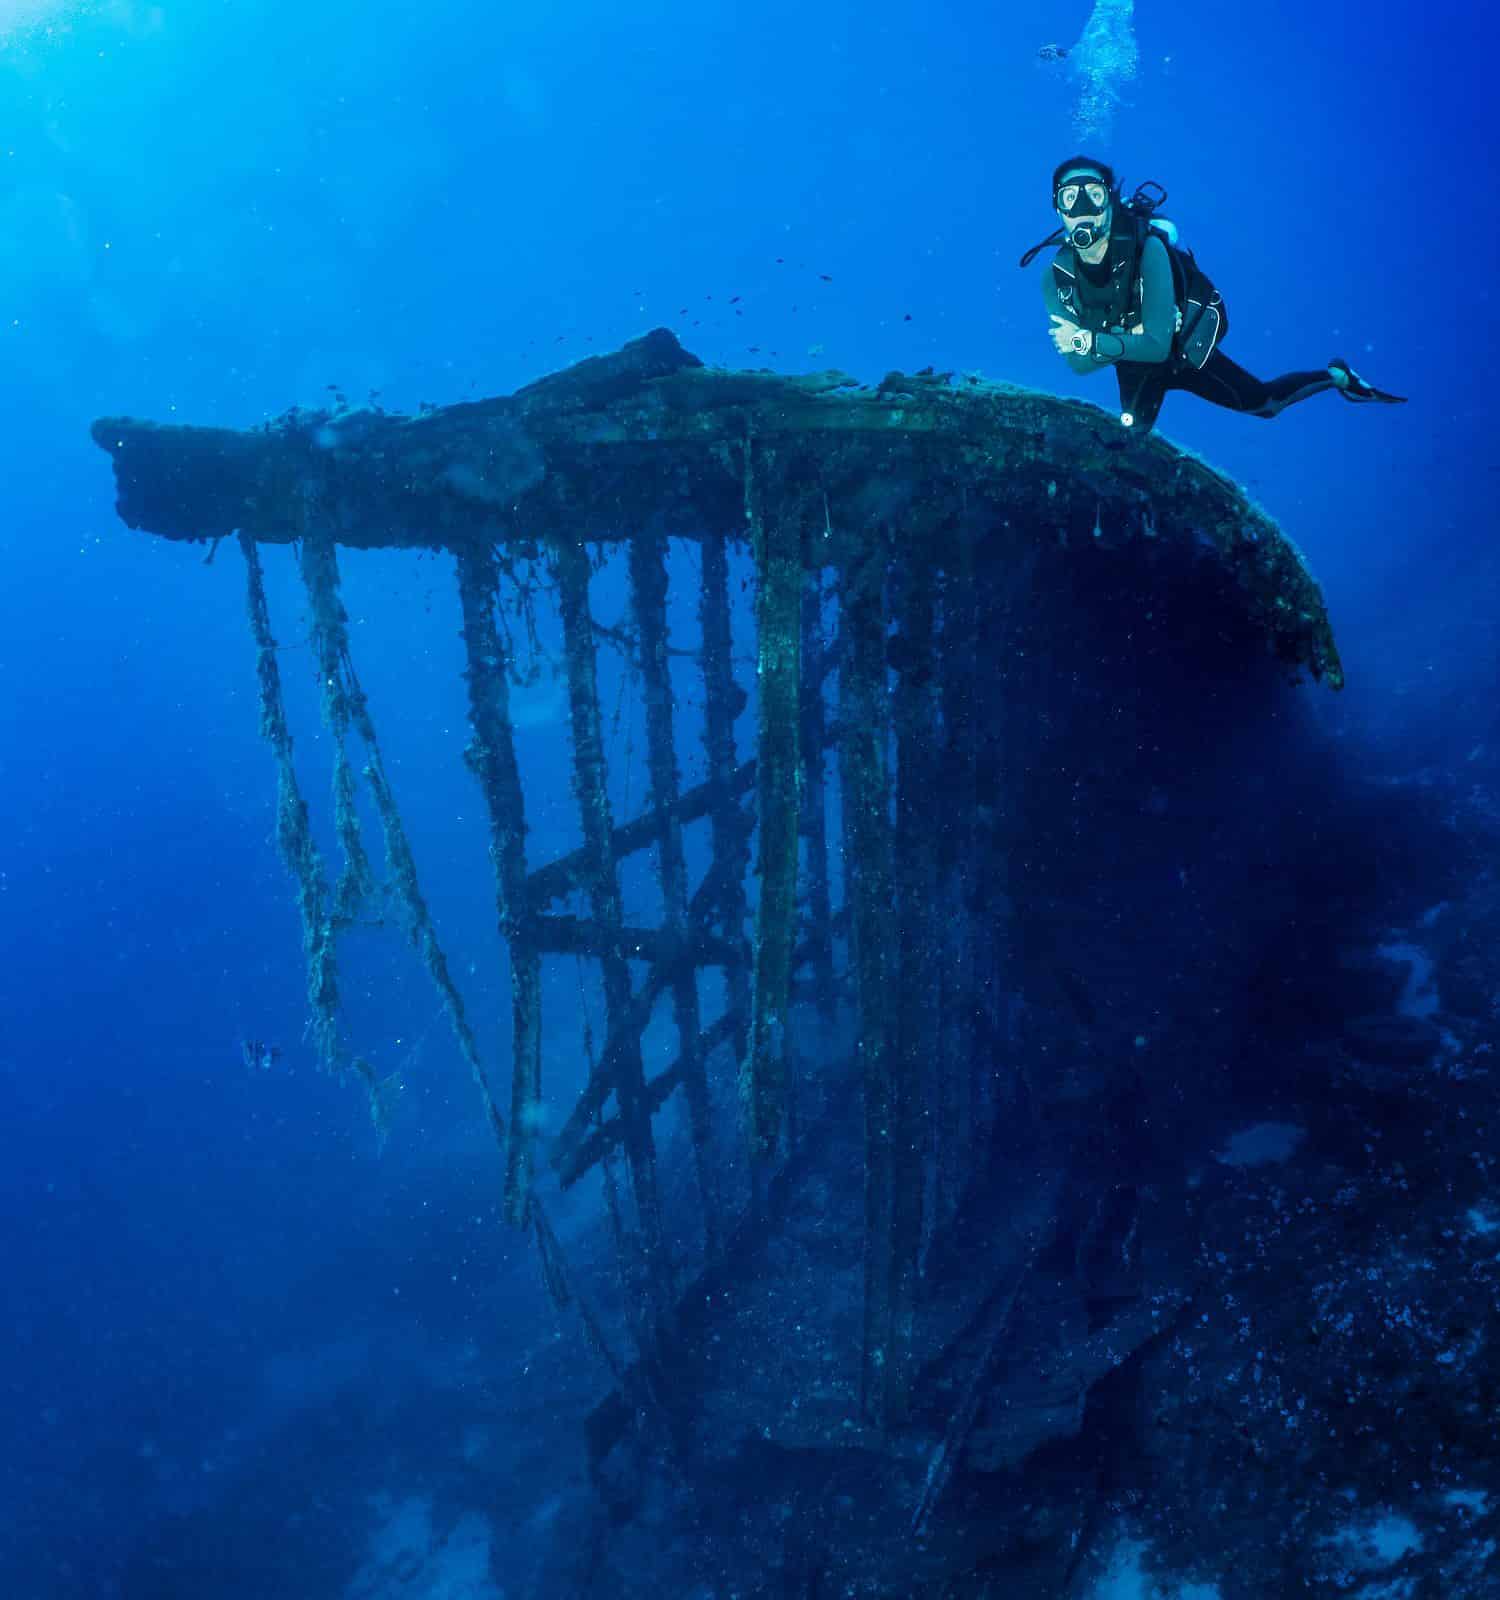 A scuba diver in front of an old, sunken shipwreck in the Aegean sea, Greece